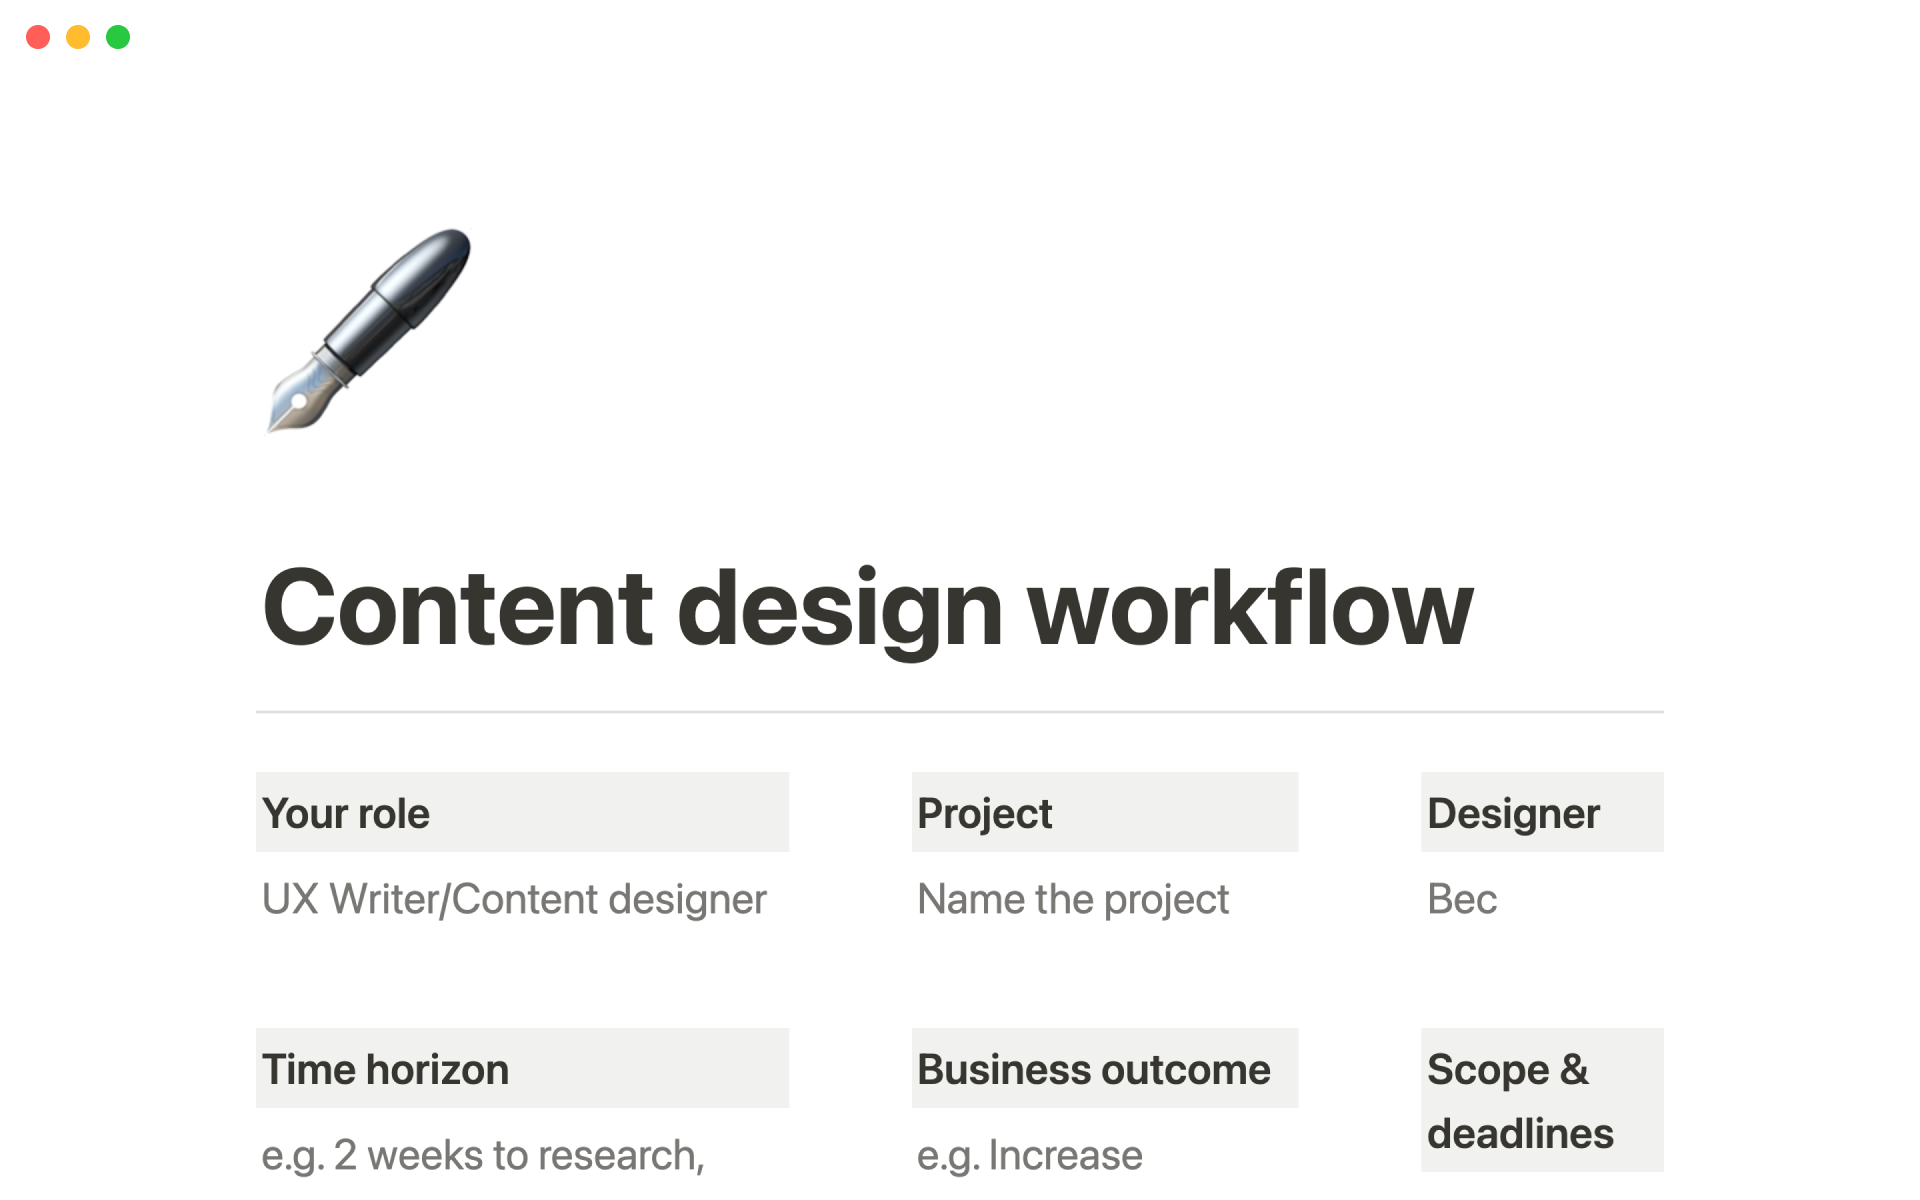 Helps UX writers, content designers and product designers from idea through to delivery.